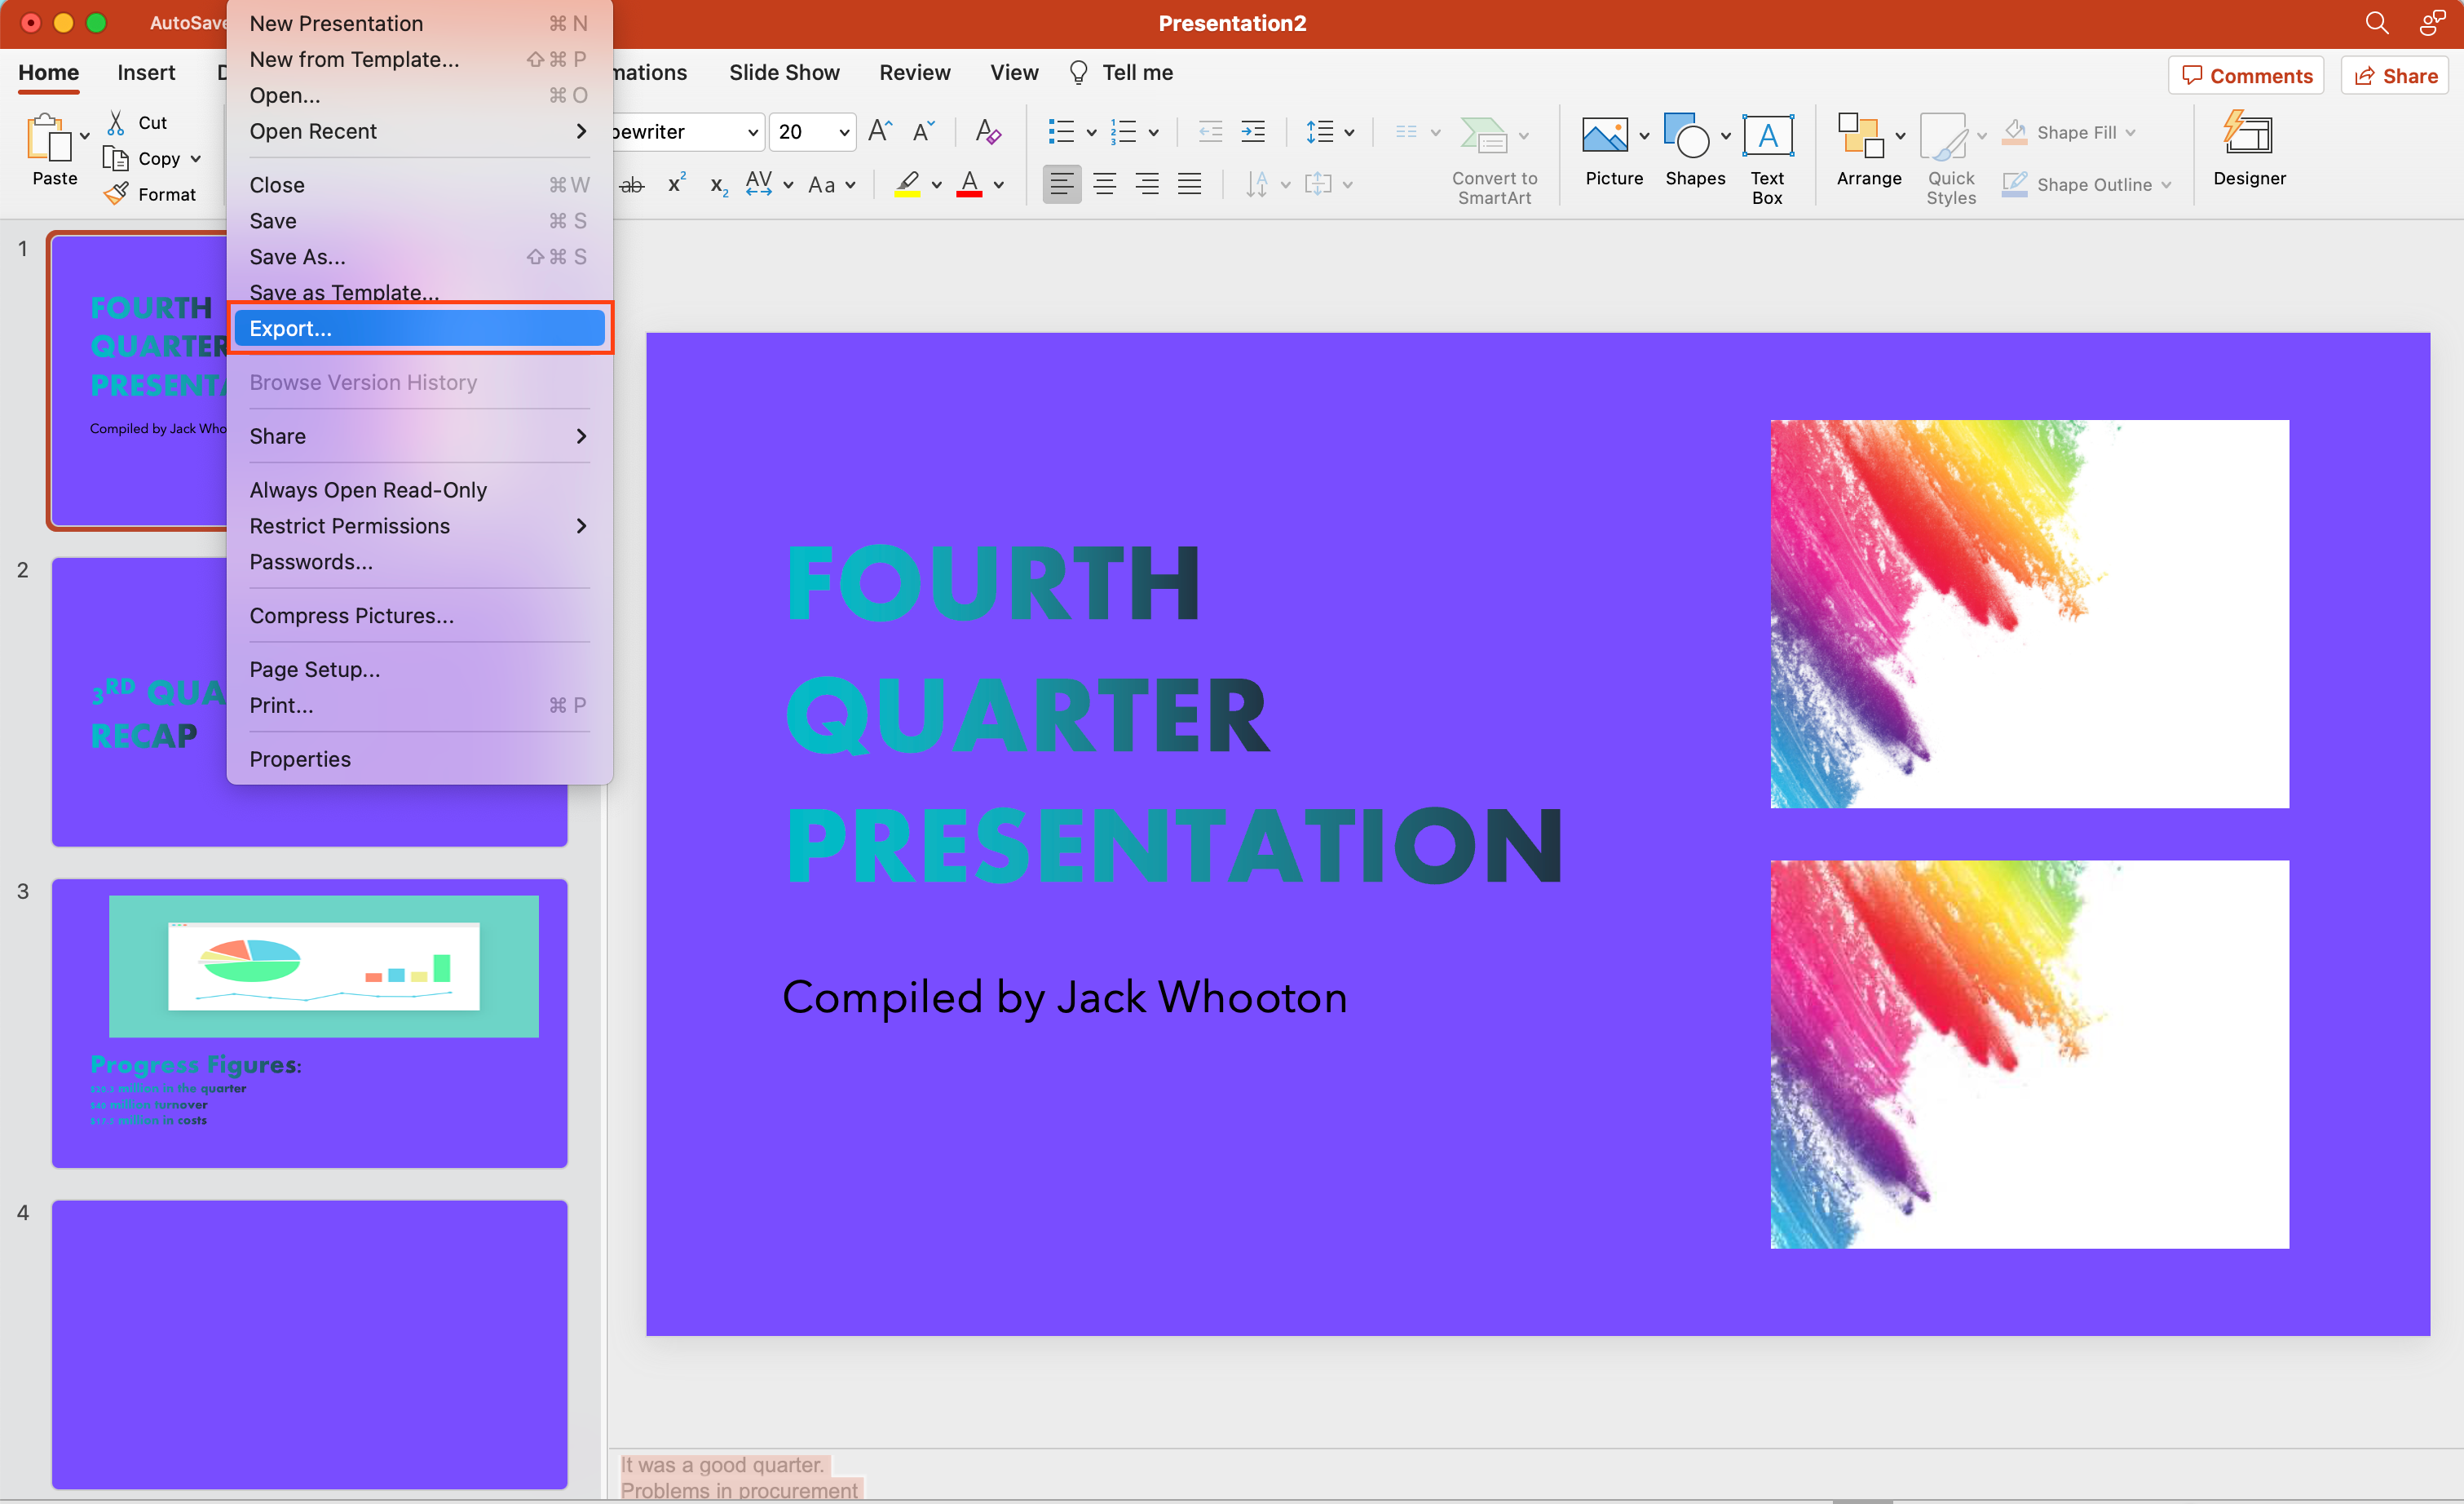 How to Download Speaker Notes in PowerPoint 